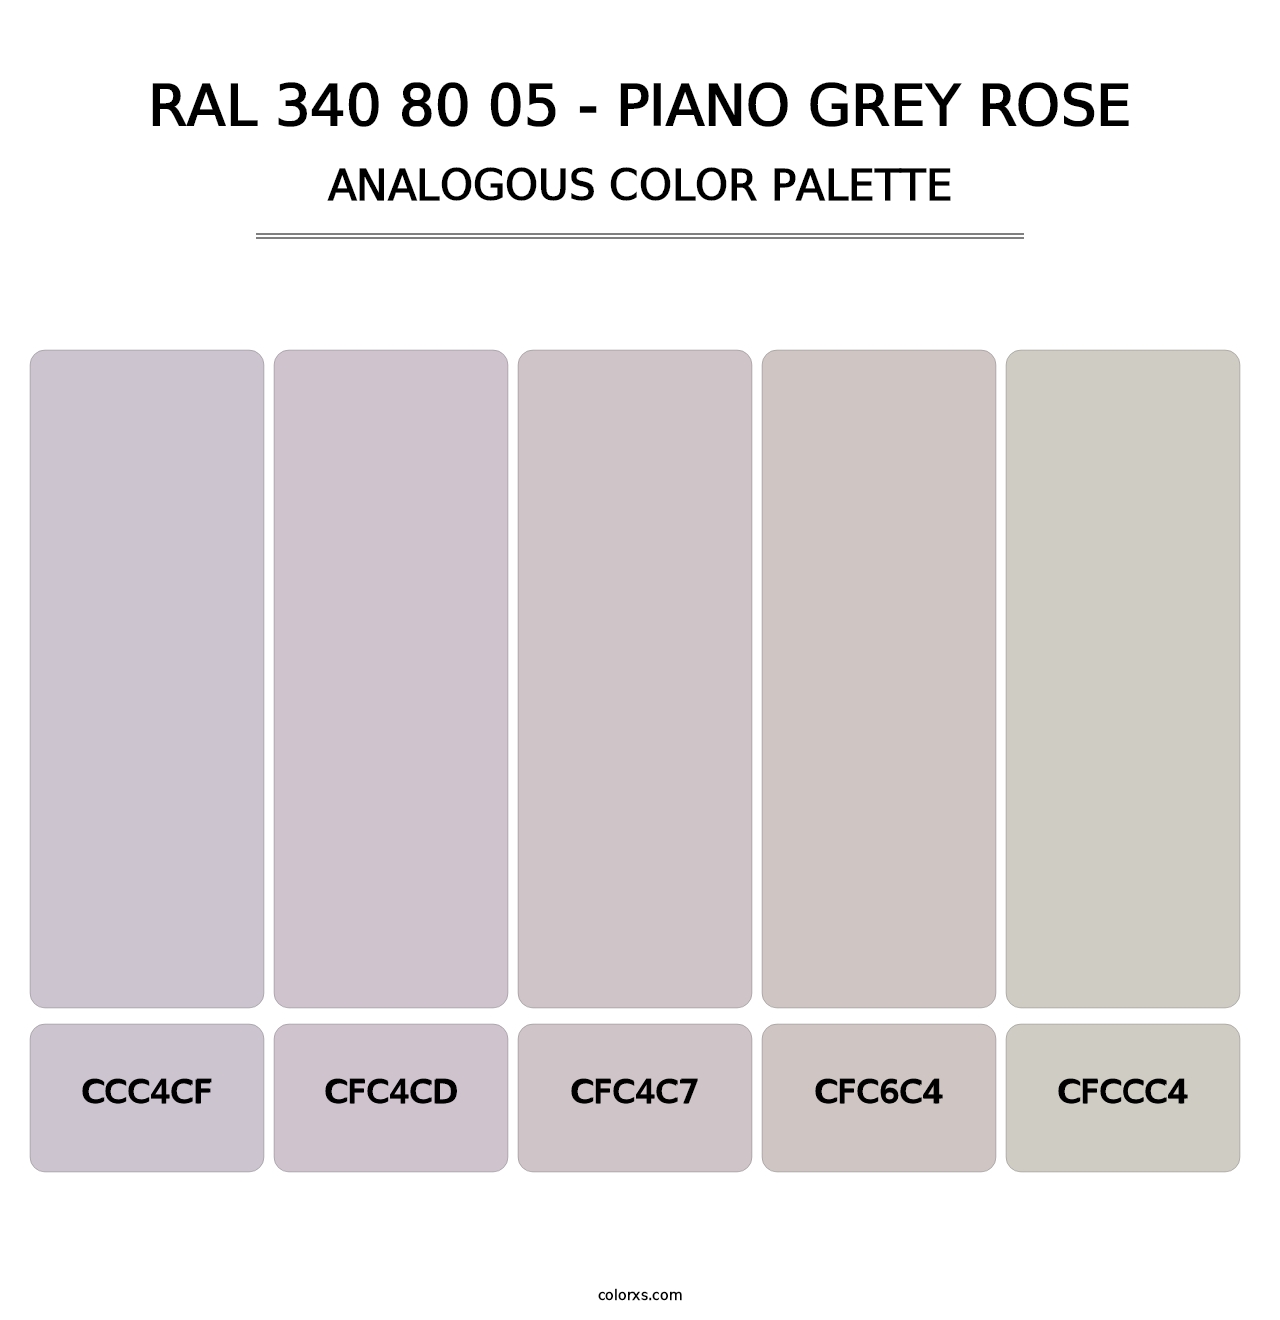 RAL 340 80 05 - Piano Grey Rose - Analogous Color Palette